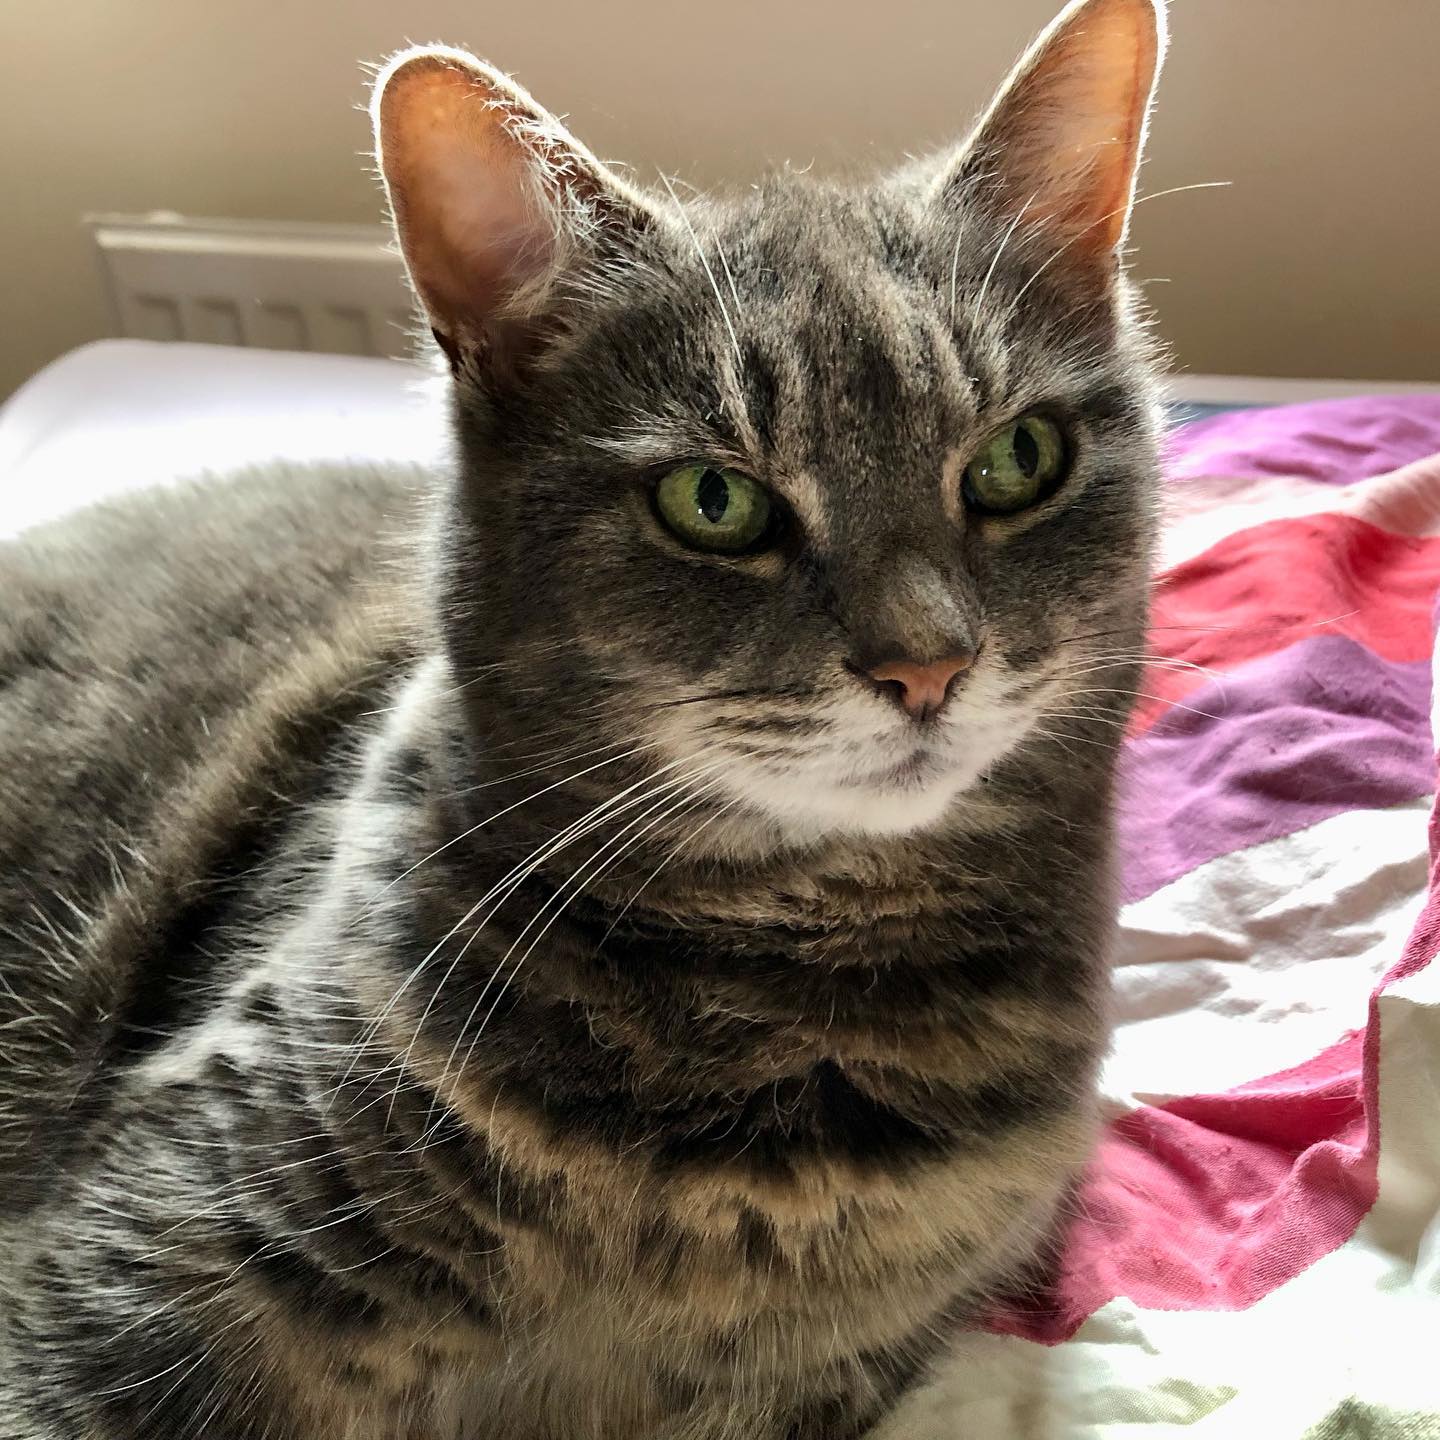 A close up of the head and shoulders of a grey tabby cat. She has a white chin, brown nose, white whiskers and large green eyes that are looking into the camera. Her fur is very plush. She is lying on a striped duvet on a bed.